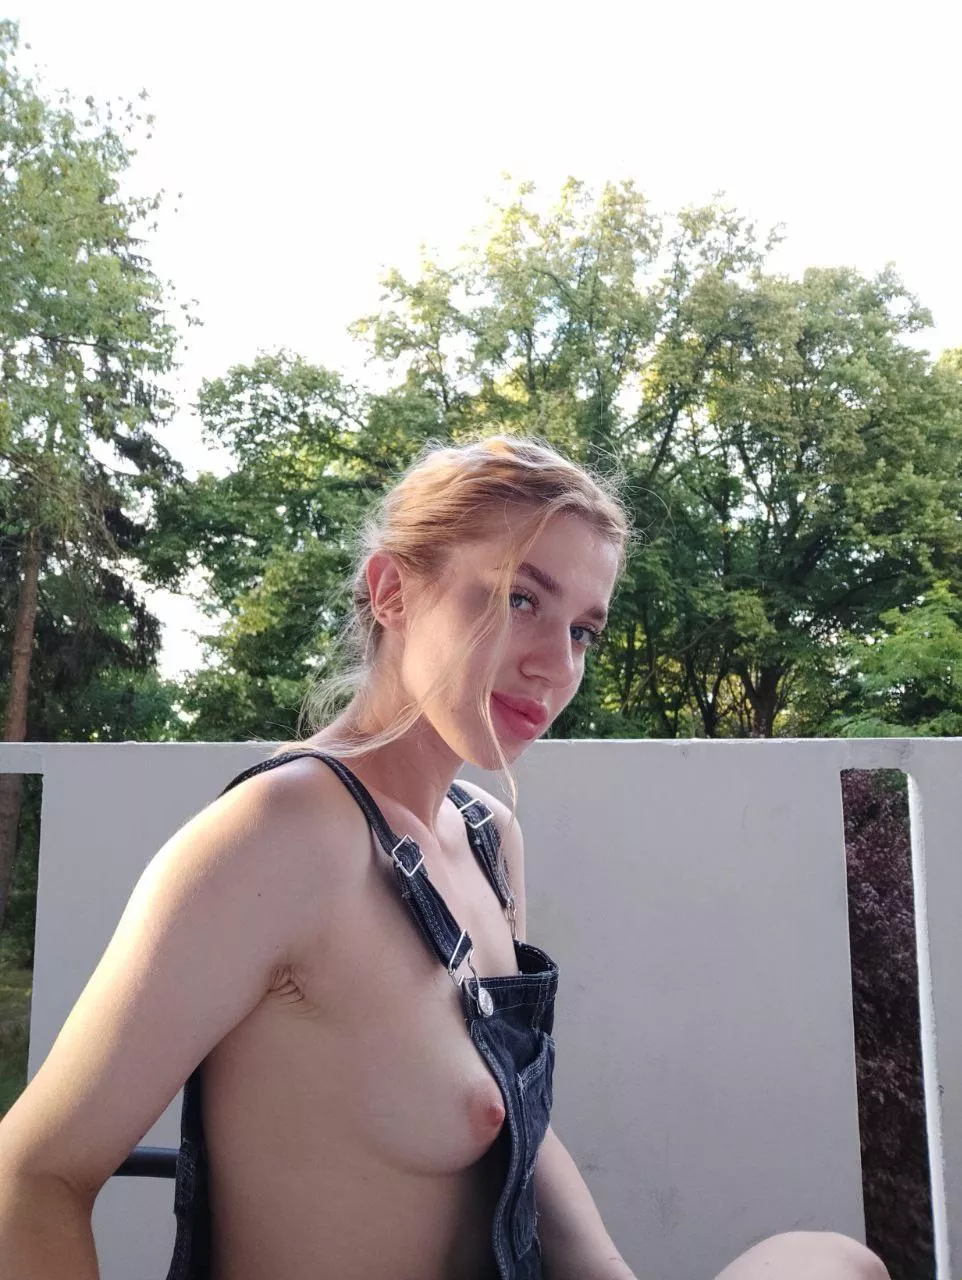 Public Nipples - Would you suck on my pierced nipples in public? nudes by Hard-to-findVampire